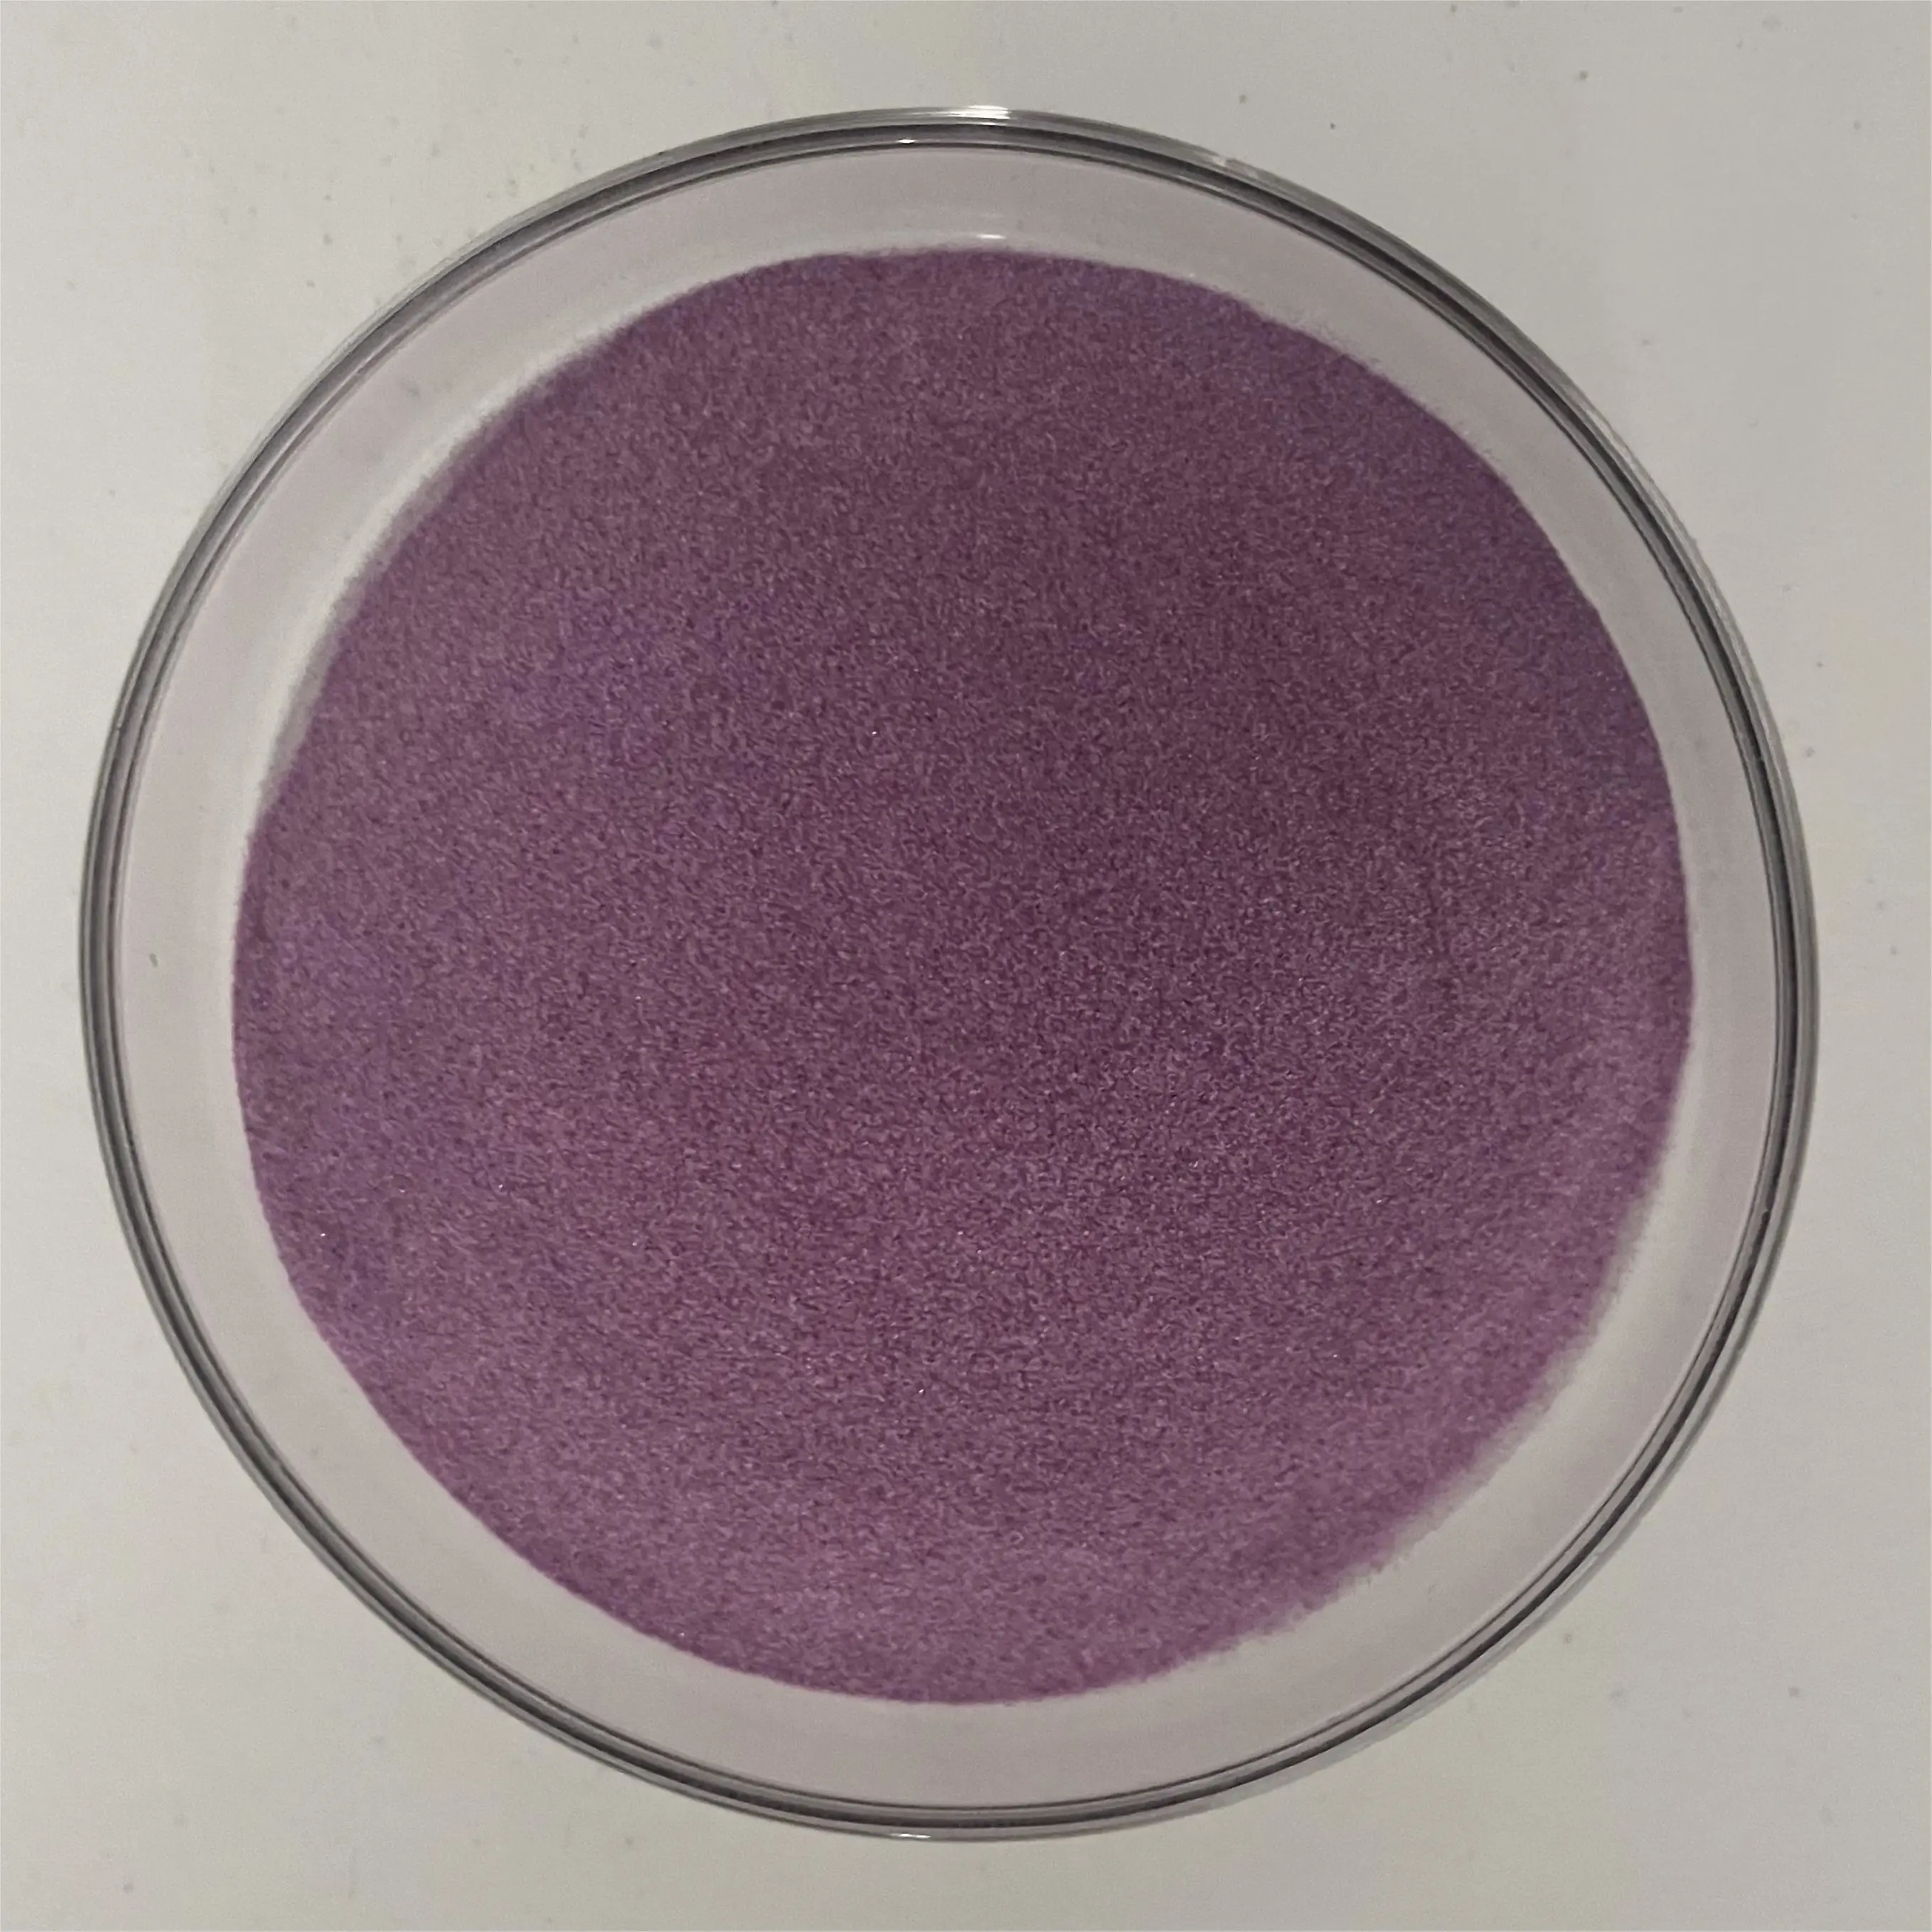 Pink Fused Alumina for Refractory